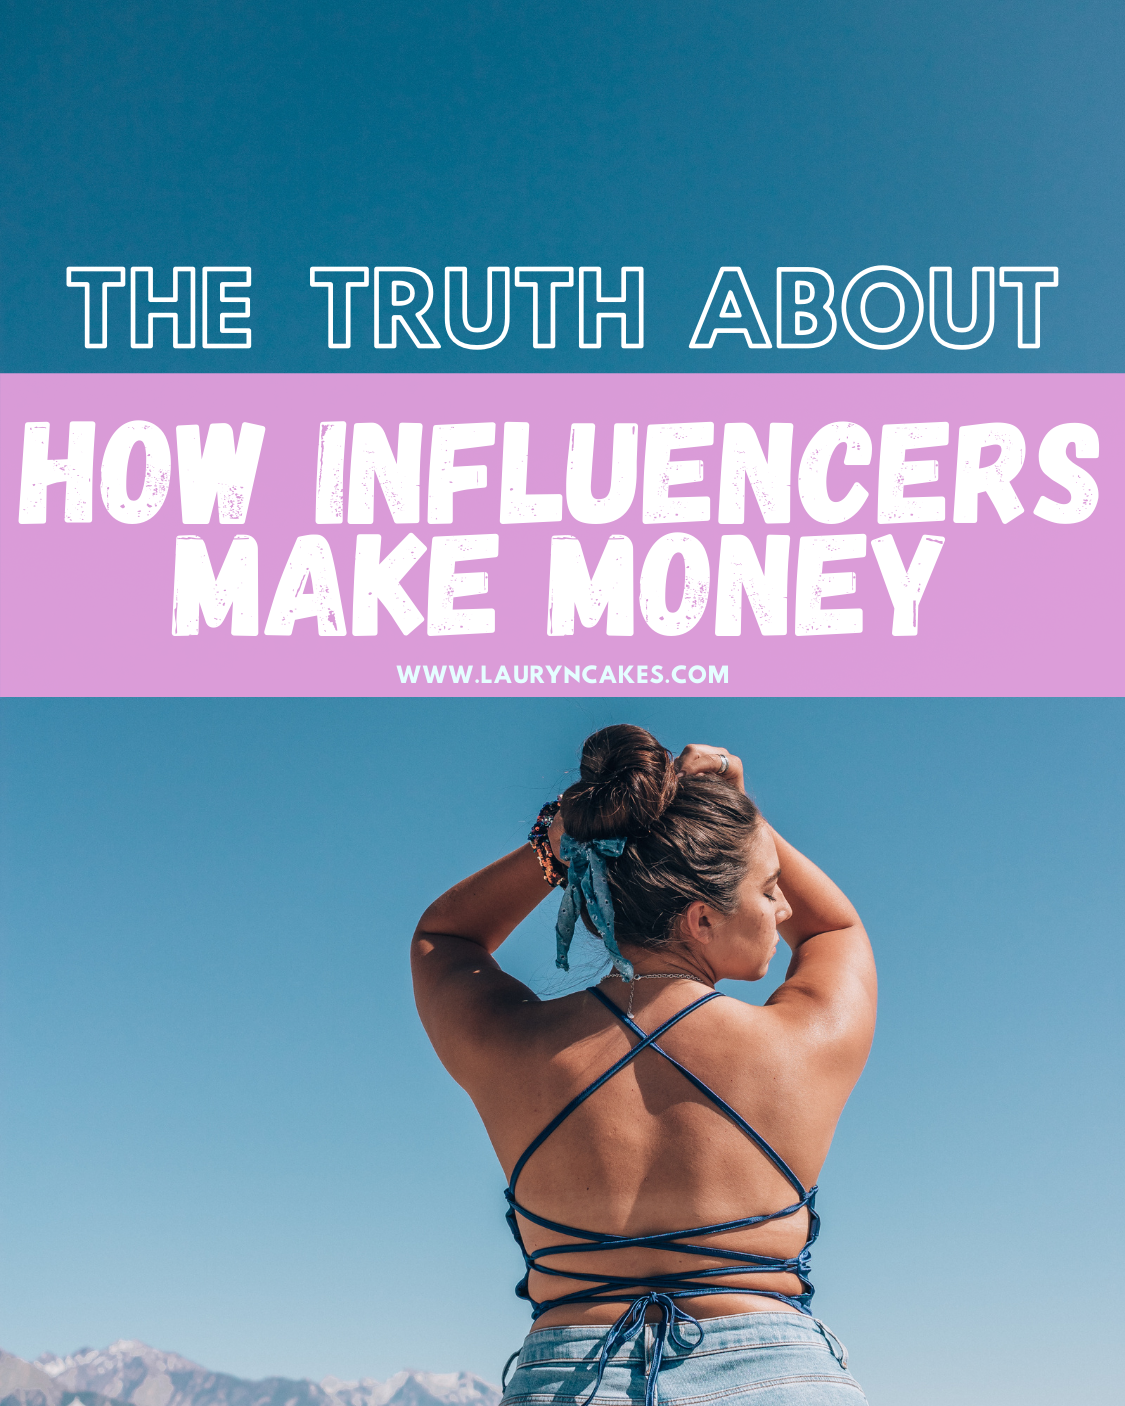 The truth about how influencers make money